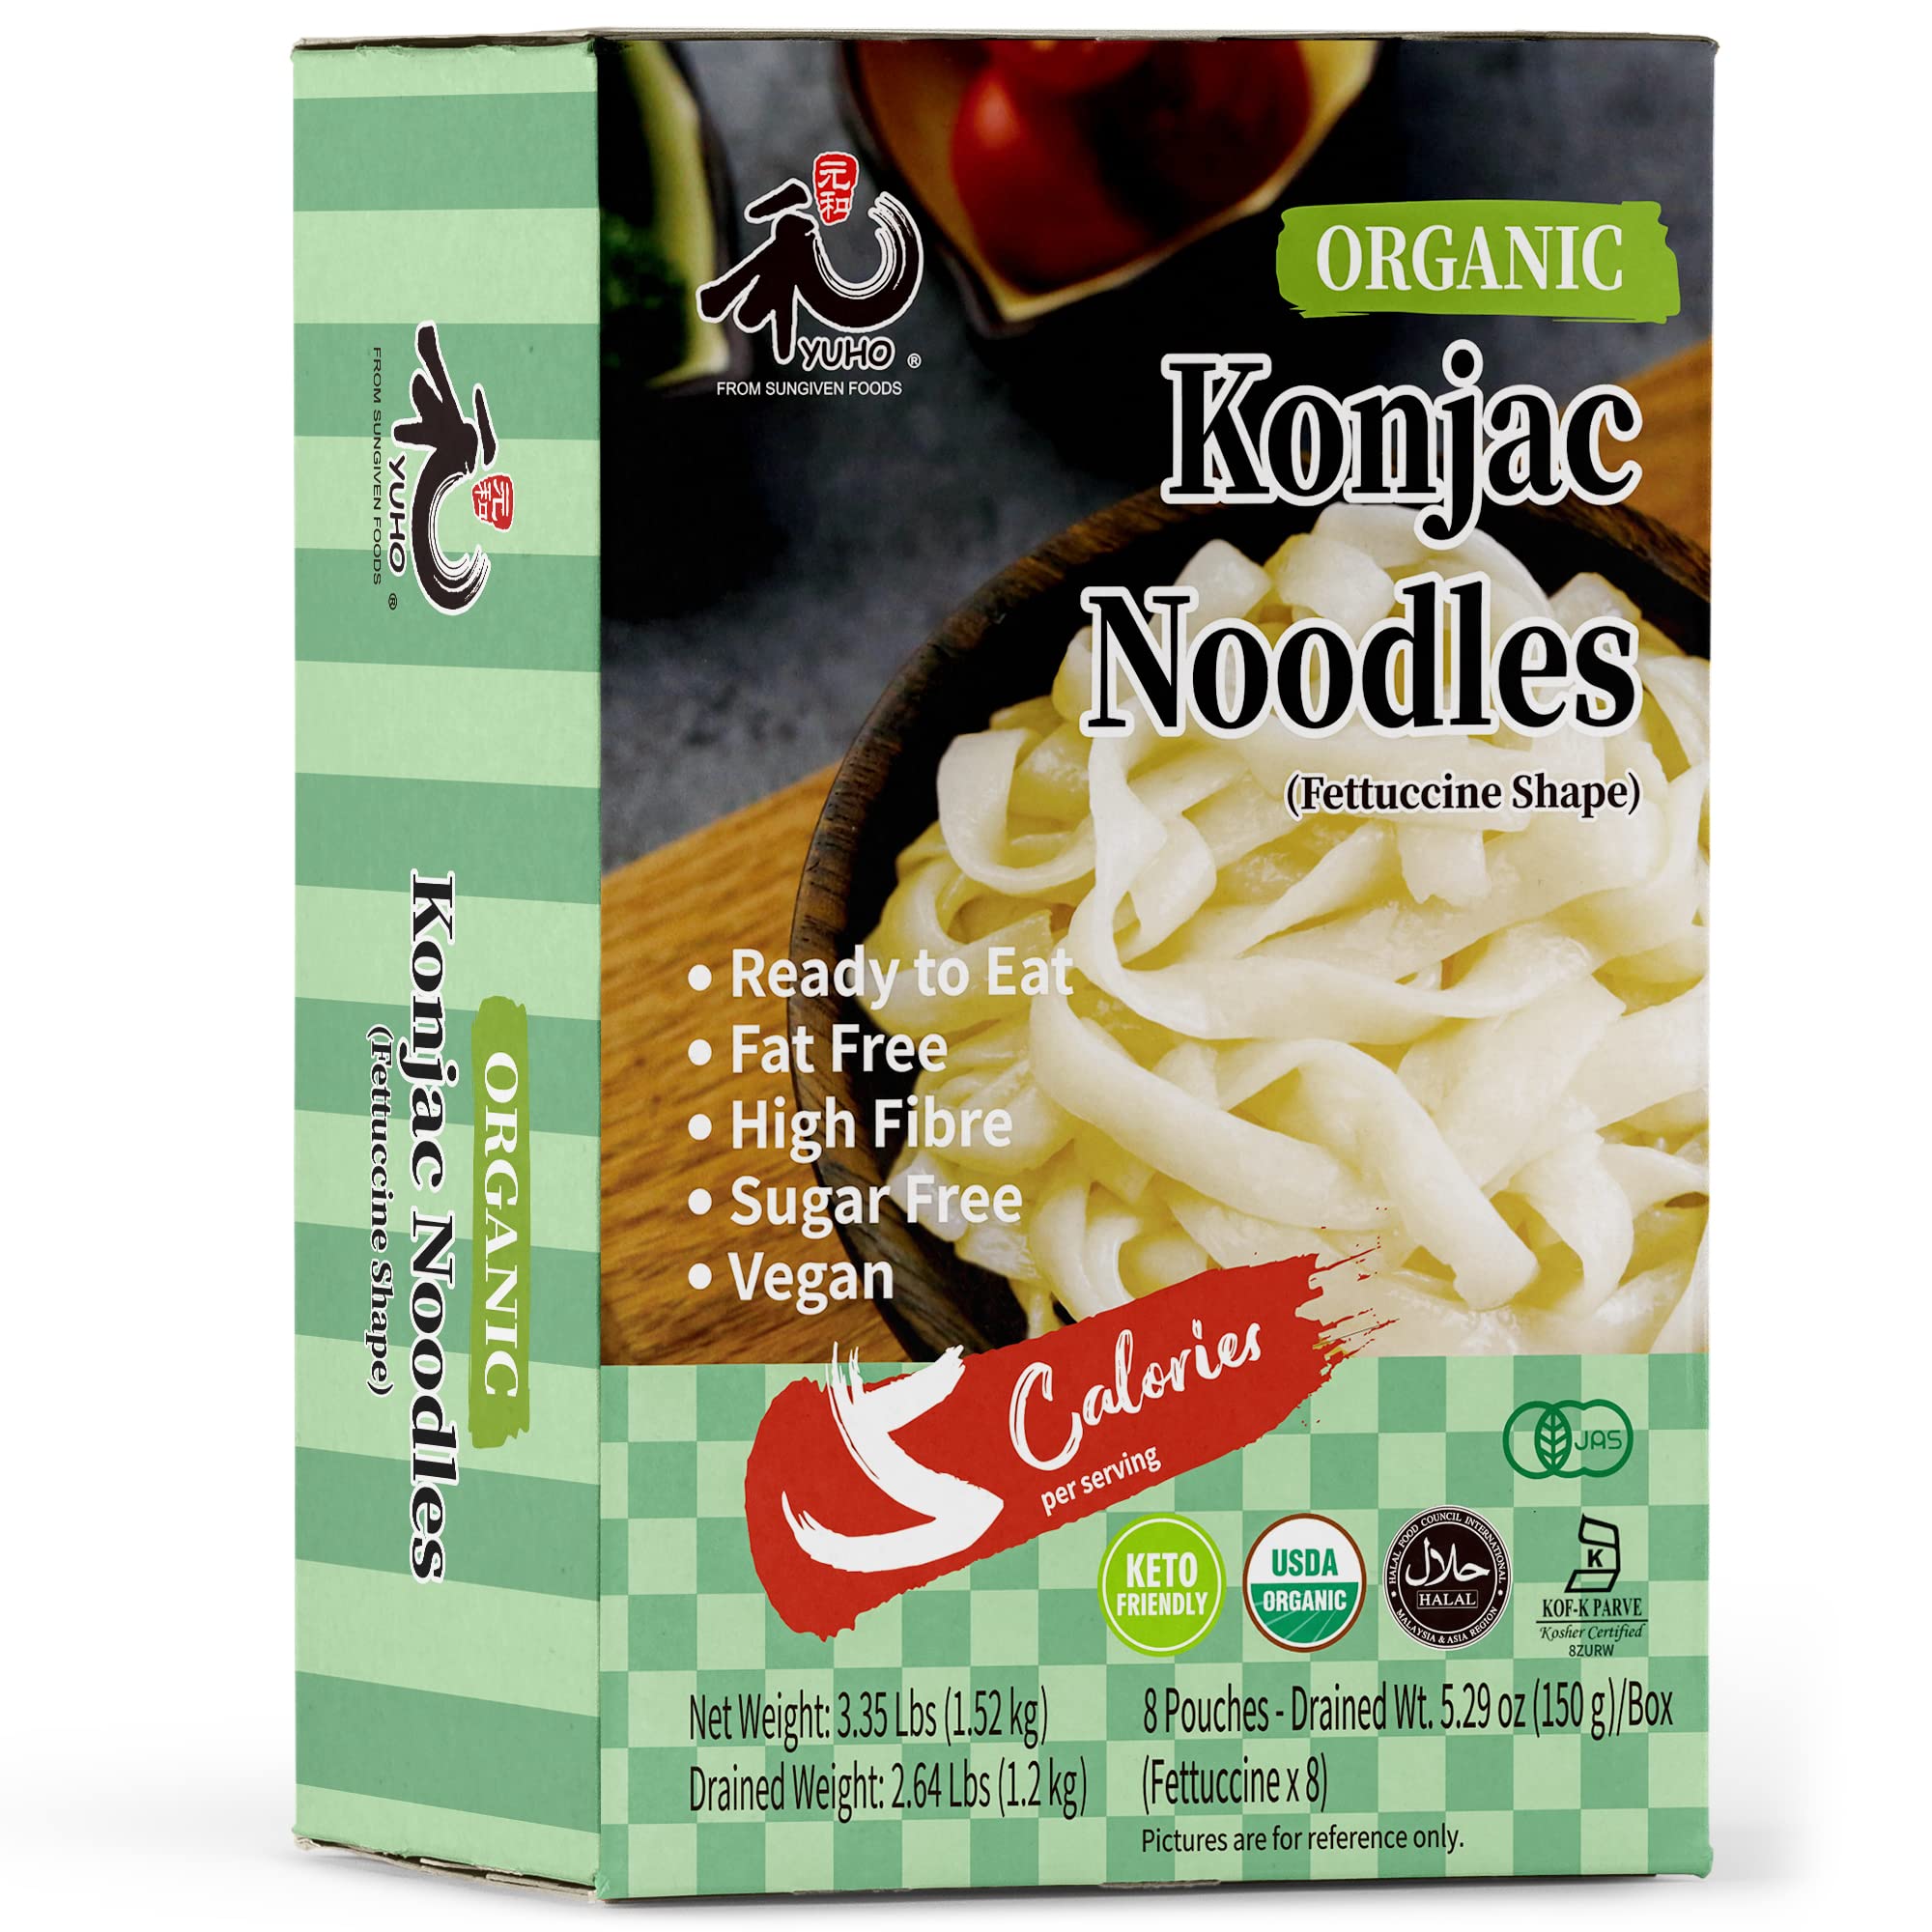 What Is Konjac and Is It Healthy?